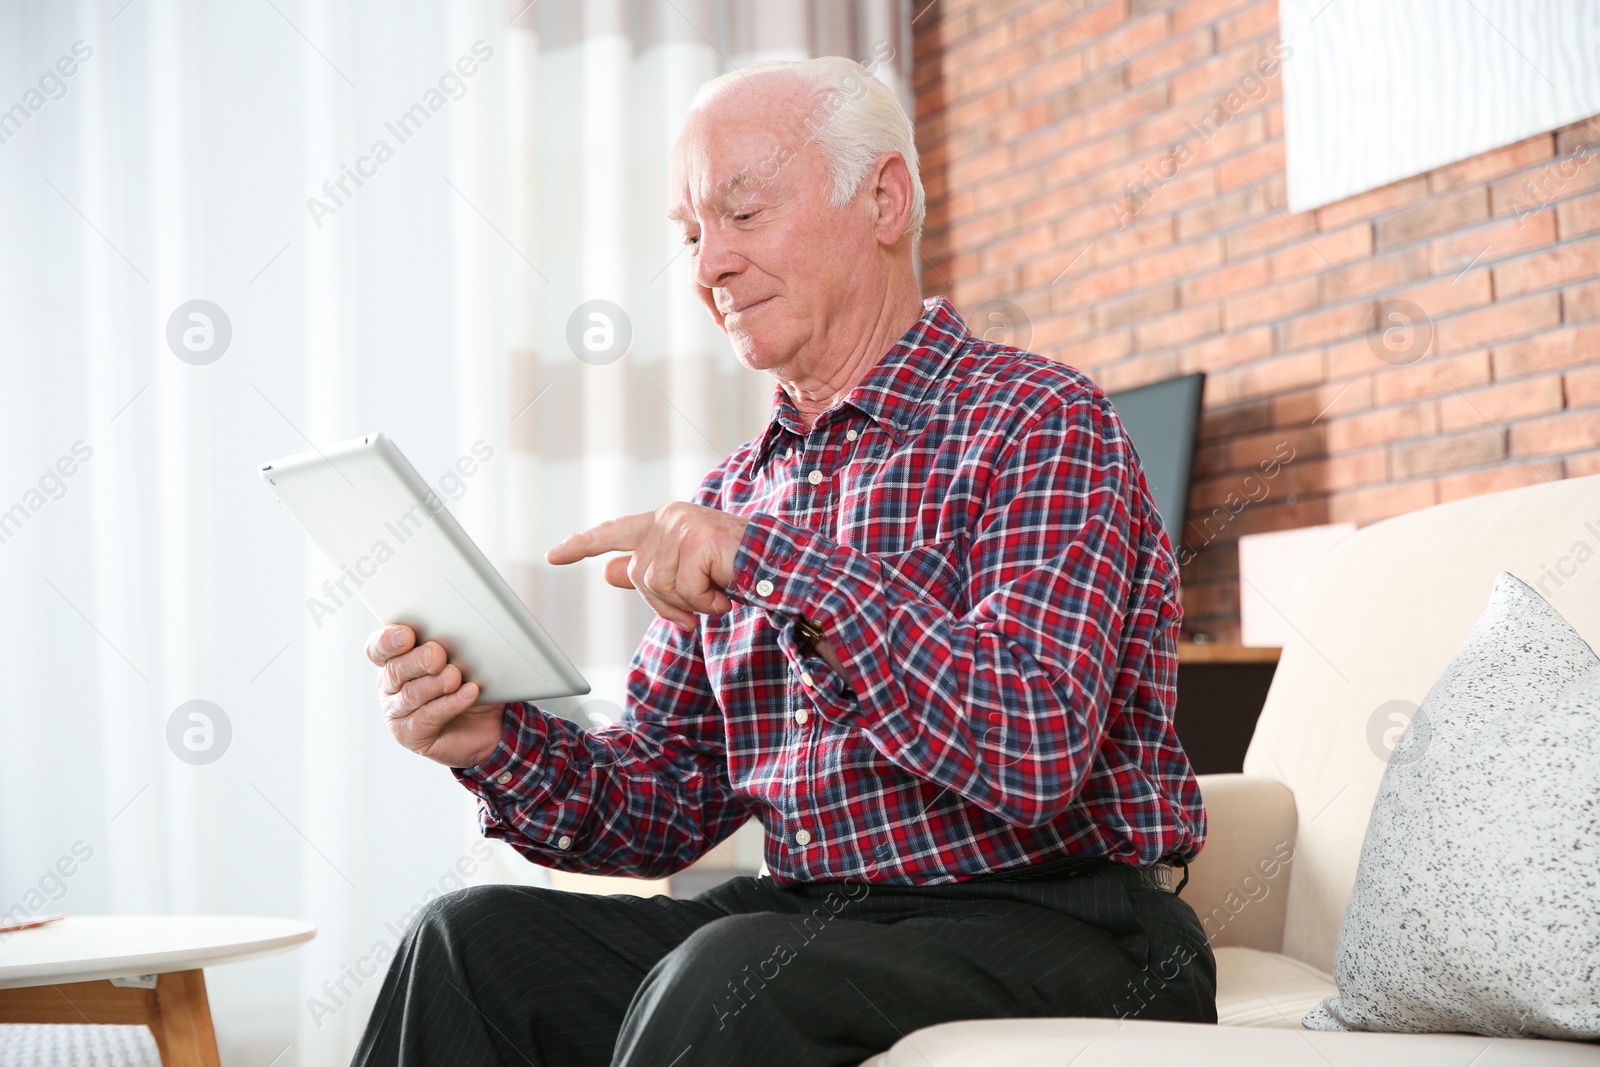 Photo of Elderly man using tablet PC on sofa in living room